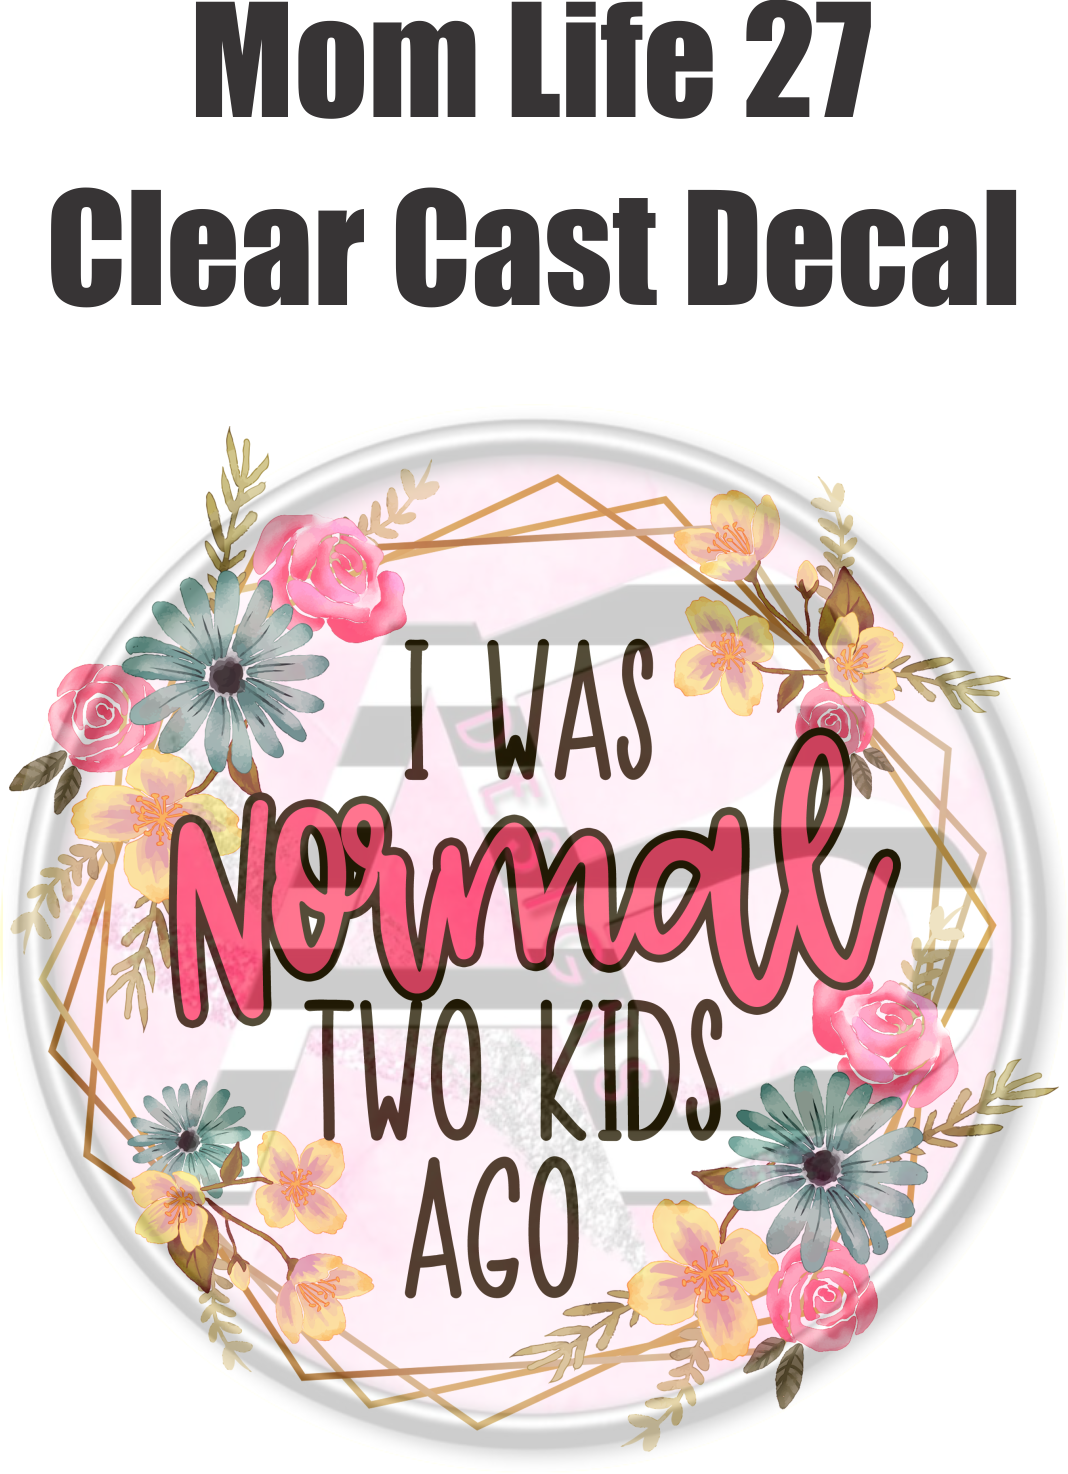 Mom Life 27 - Clear Cast Decal